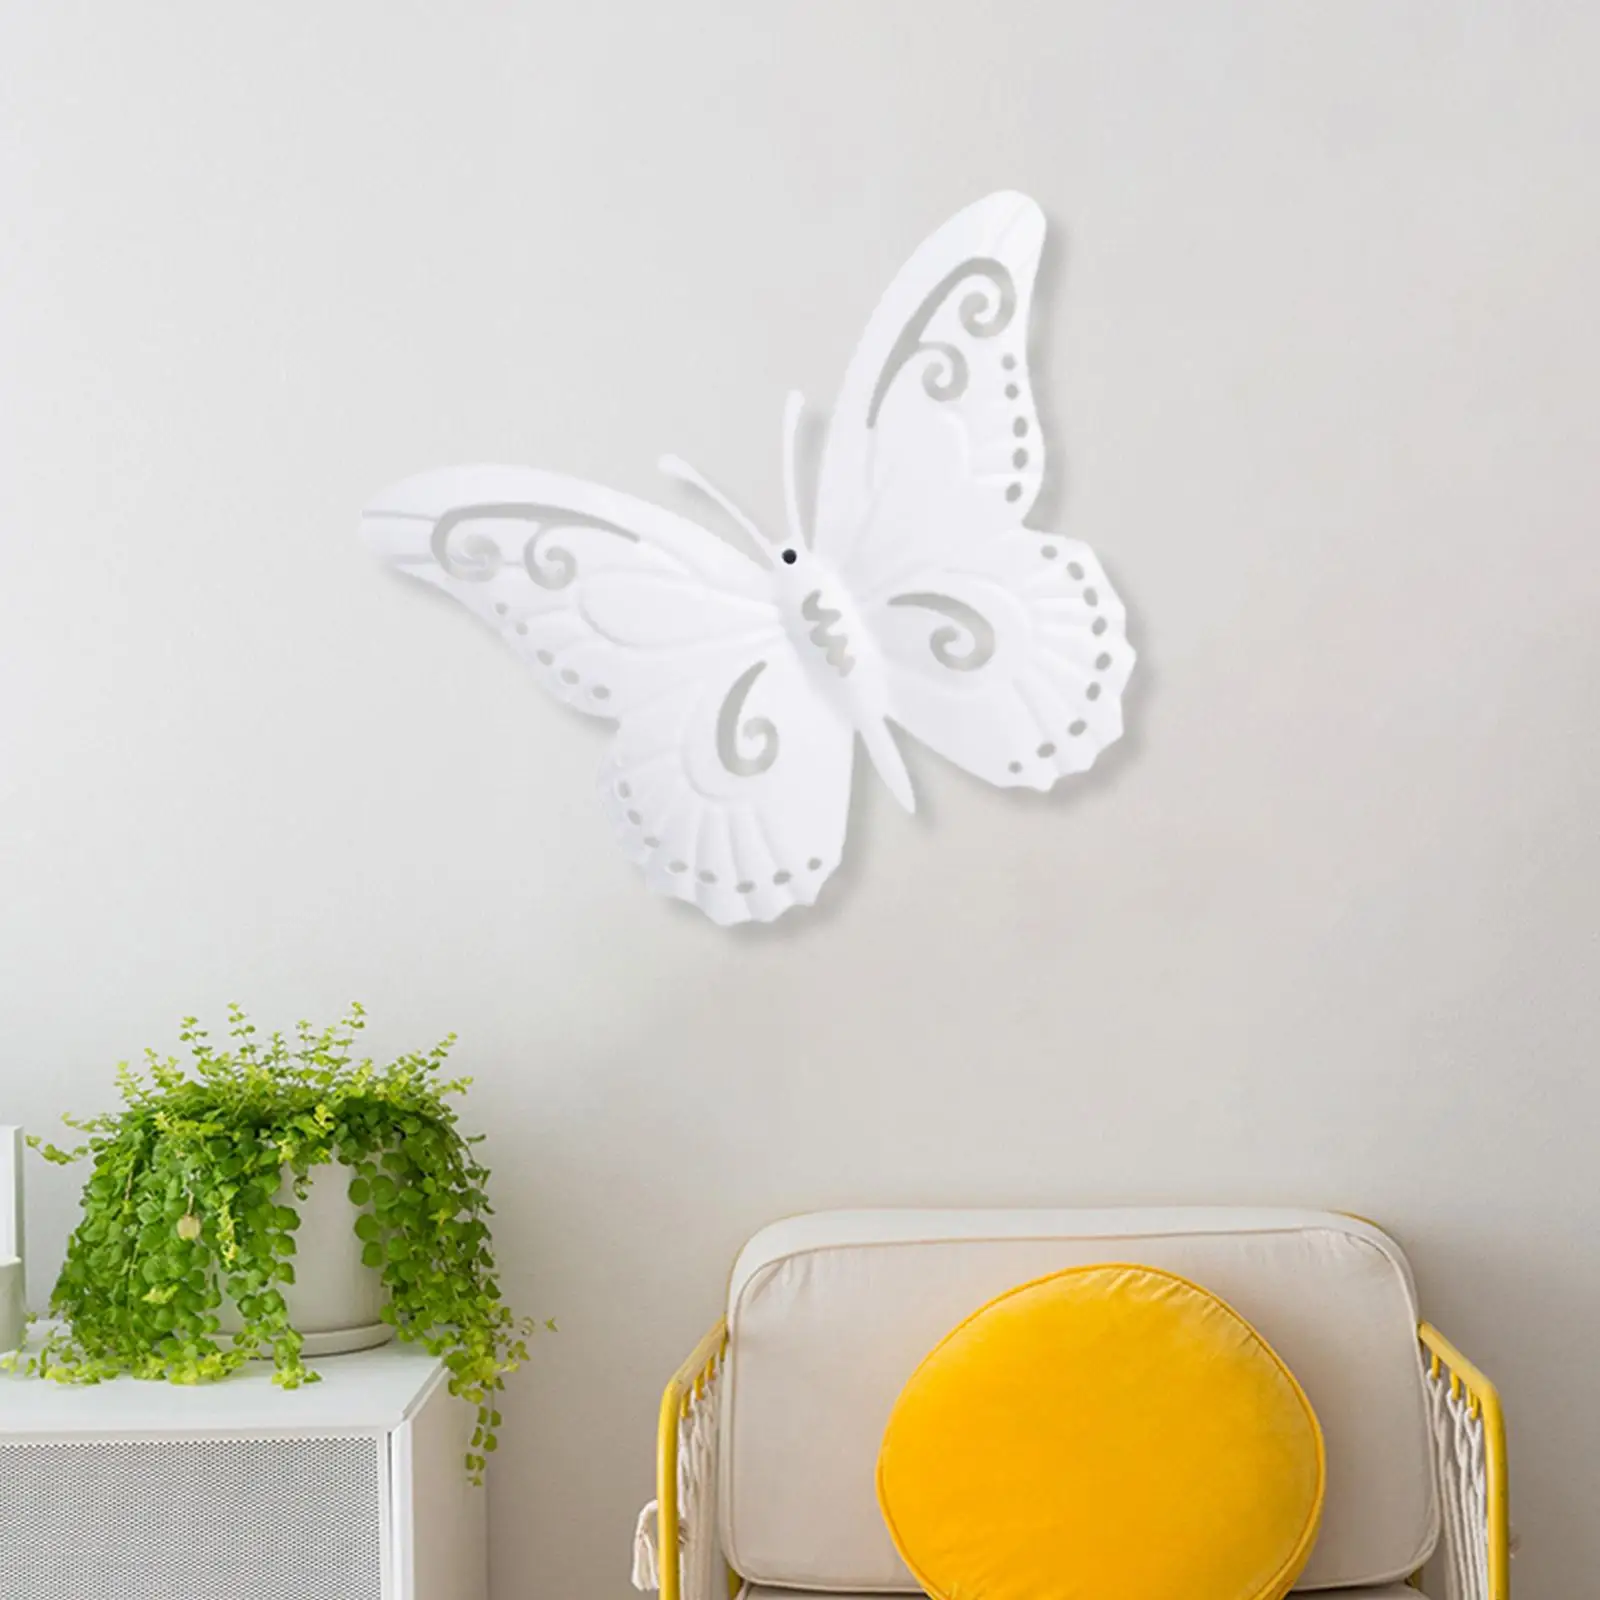 Butterfly Wall Decor Hanging Butterflies Statue for Farmhouse Kitchen Yard